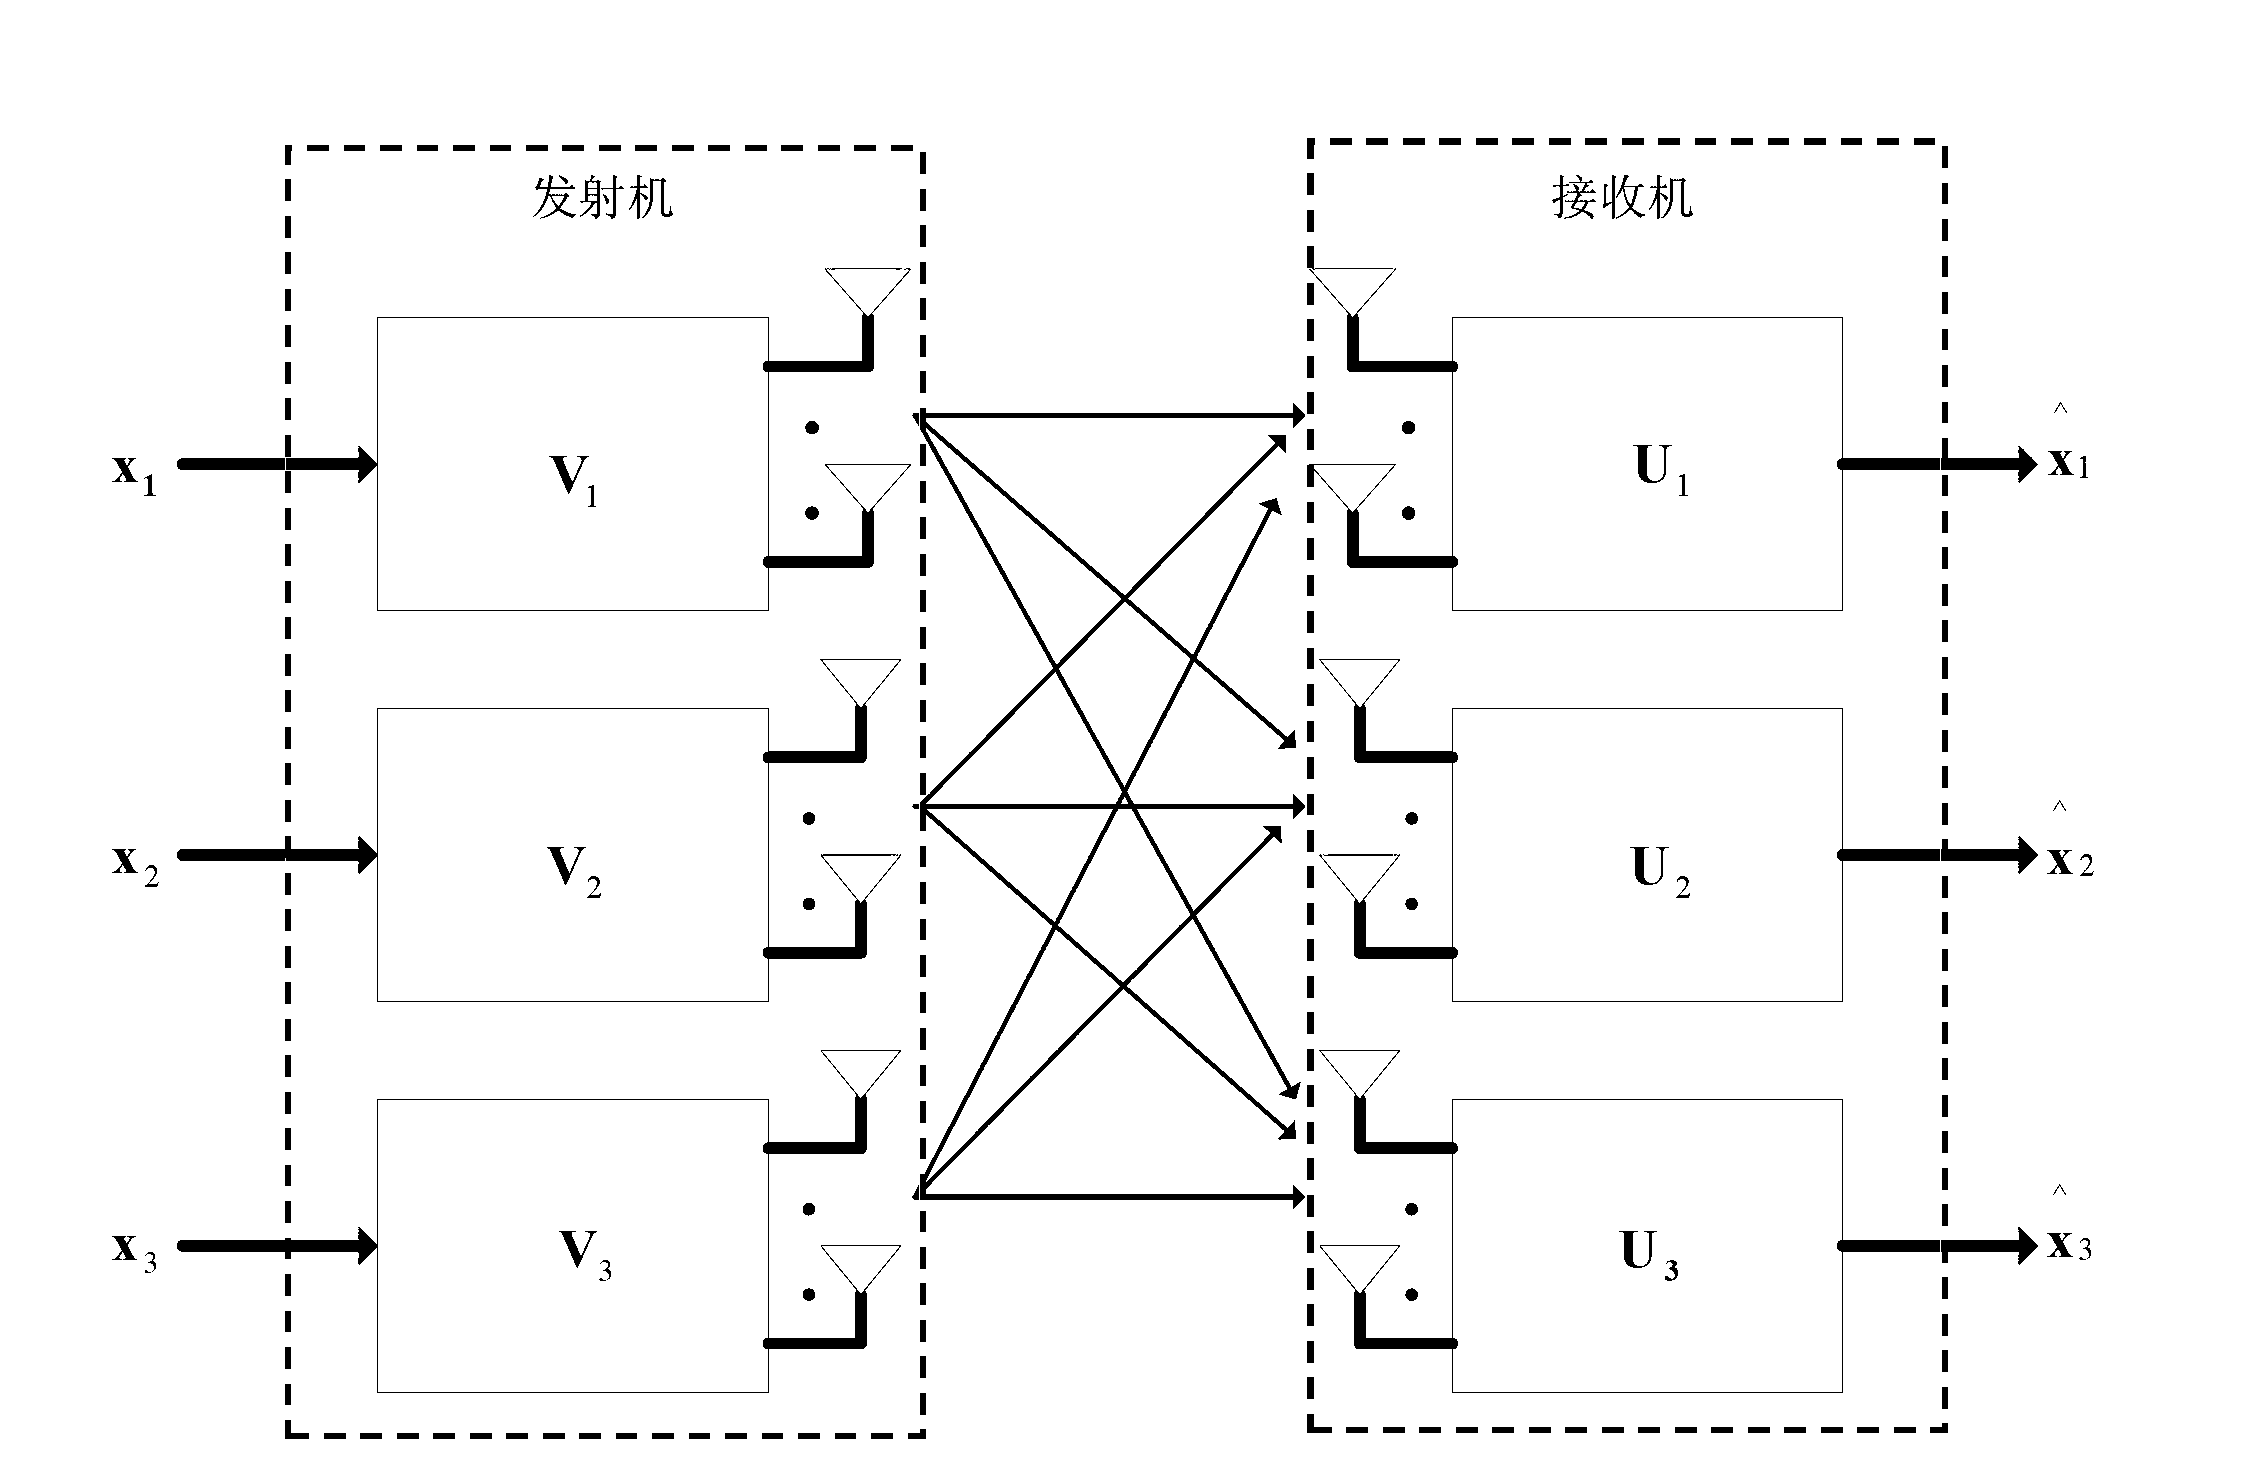 Energy-efficient interference alignment method for multi-cell MIMO (multiple-input and multiple-output) system